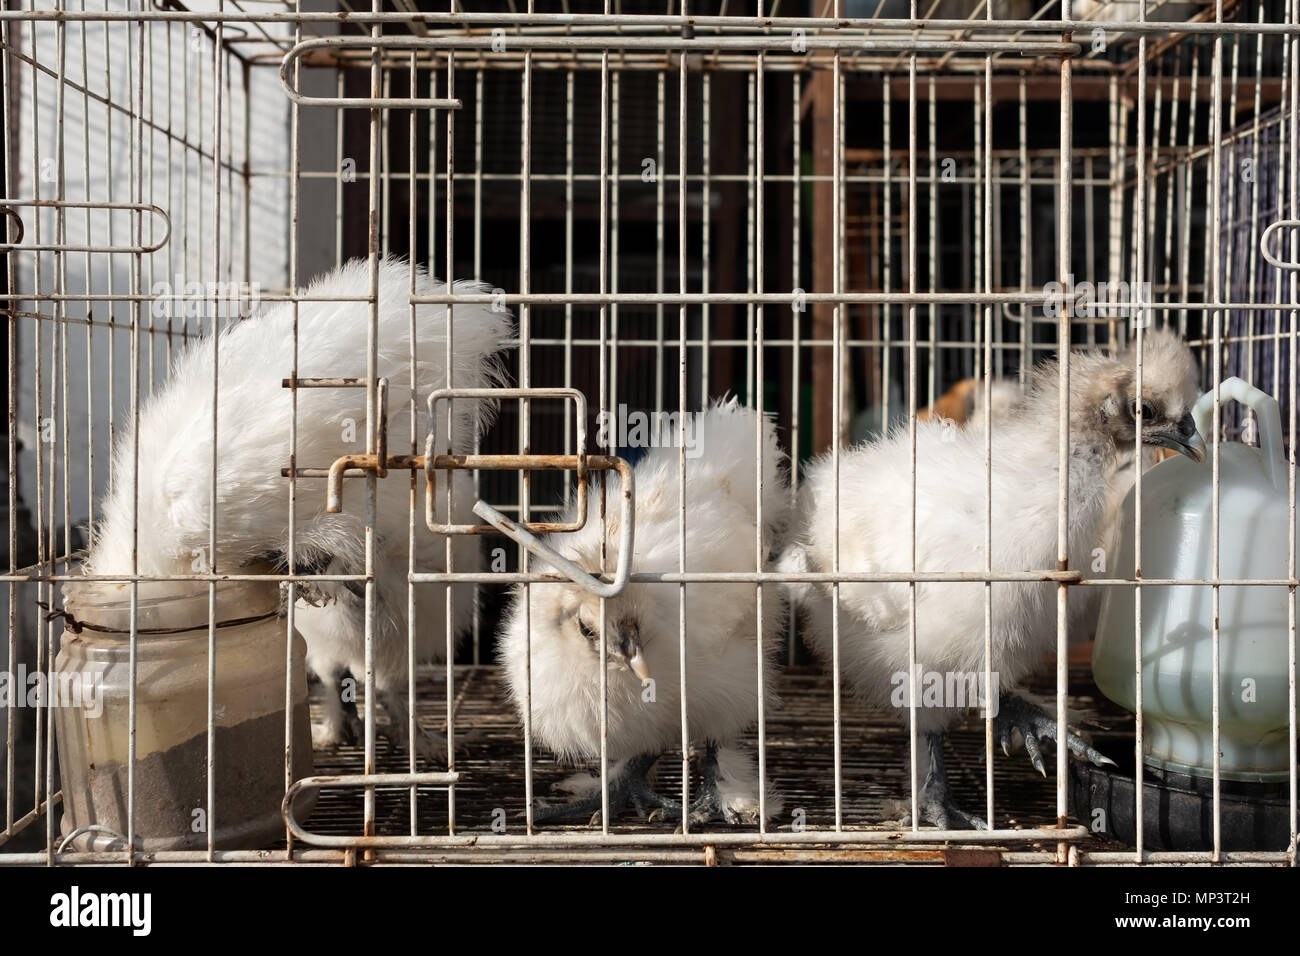 White chikens of special breed sitting in cage. Stock Photo